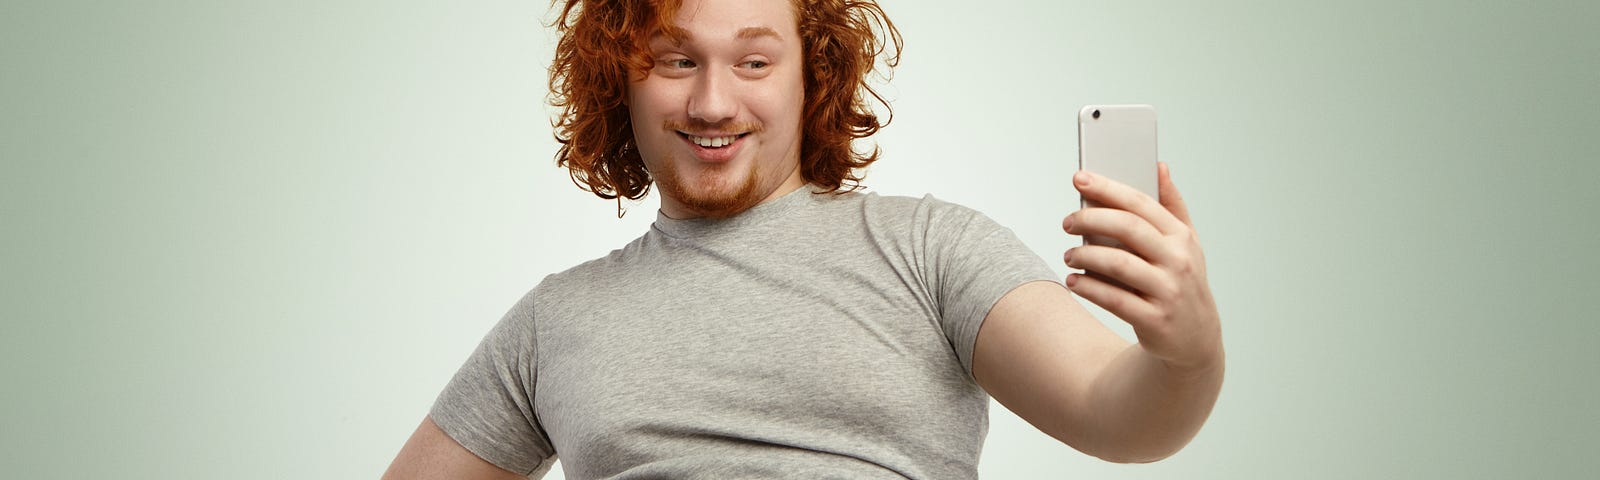 obese-young-male-with-curly-ginger-hair-beard-holding-mobile-phone-posing-selfie-looking-with-flirty-smile-while-his-fat-belly-hanging-out-grey-shrunk-t-shirt-jeans-pants — Un Swede